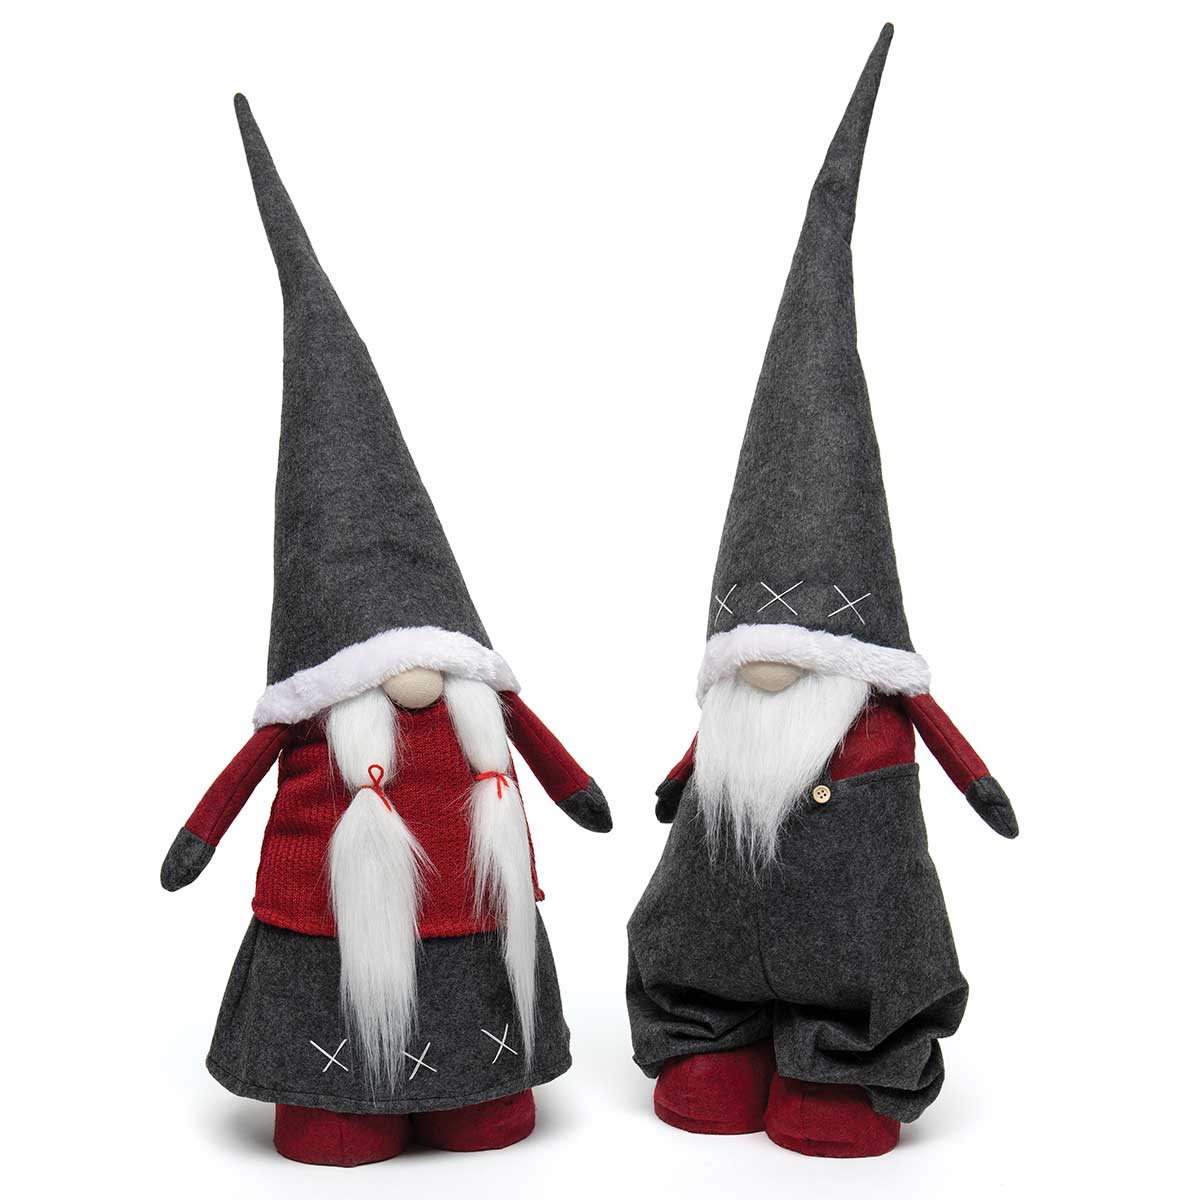 The Swiss Twins Expandable Gnome Burgundy/Grey Metal Telescoping